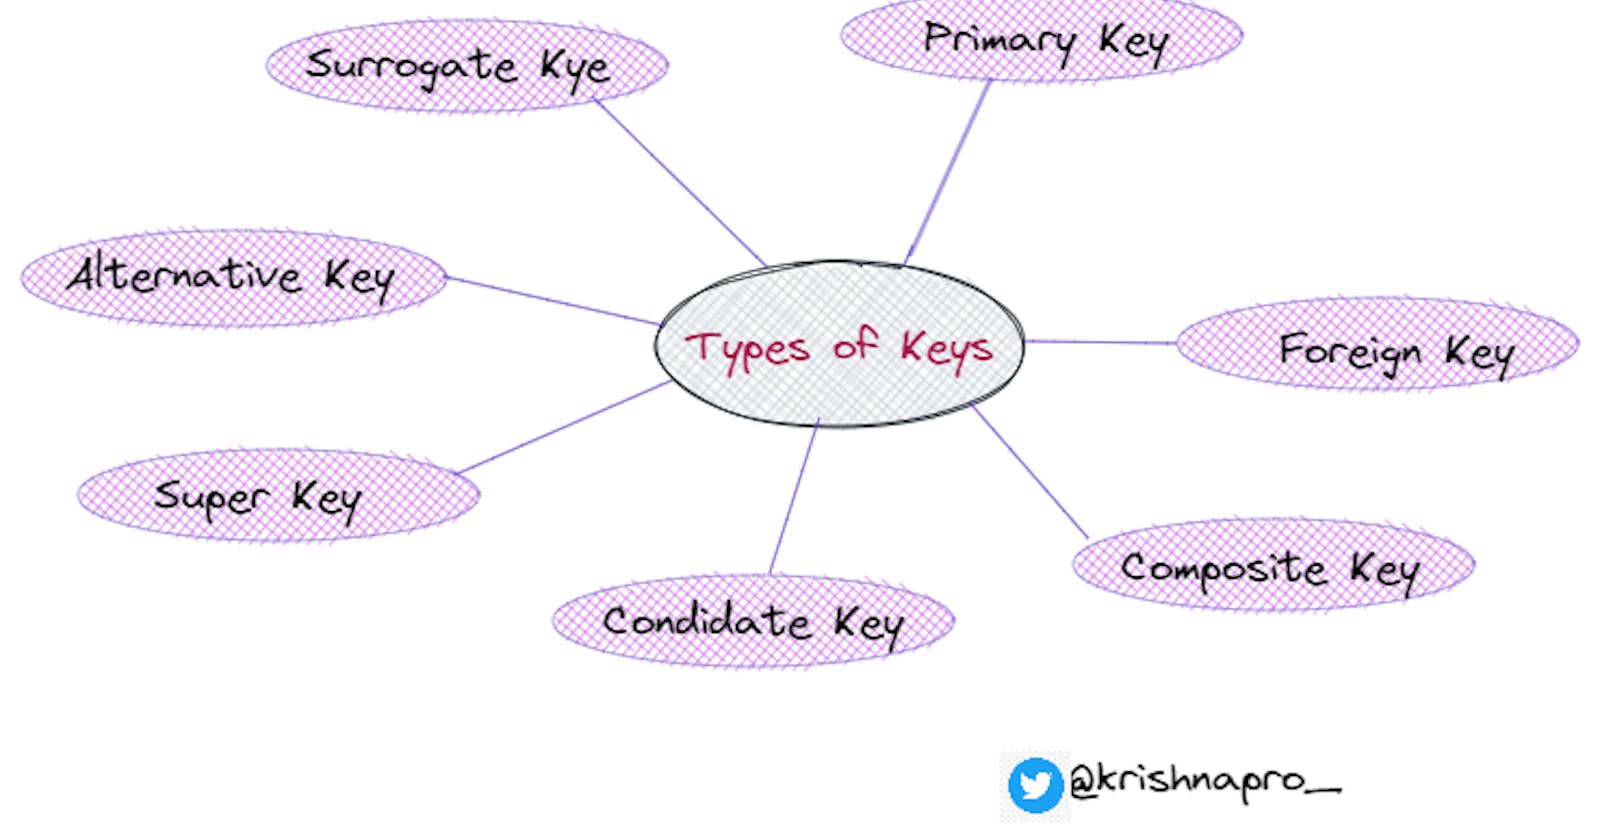 Key Concepts in Database Management: A Beginner's Guide